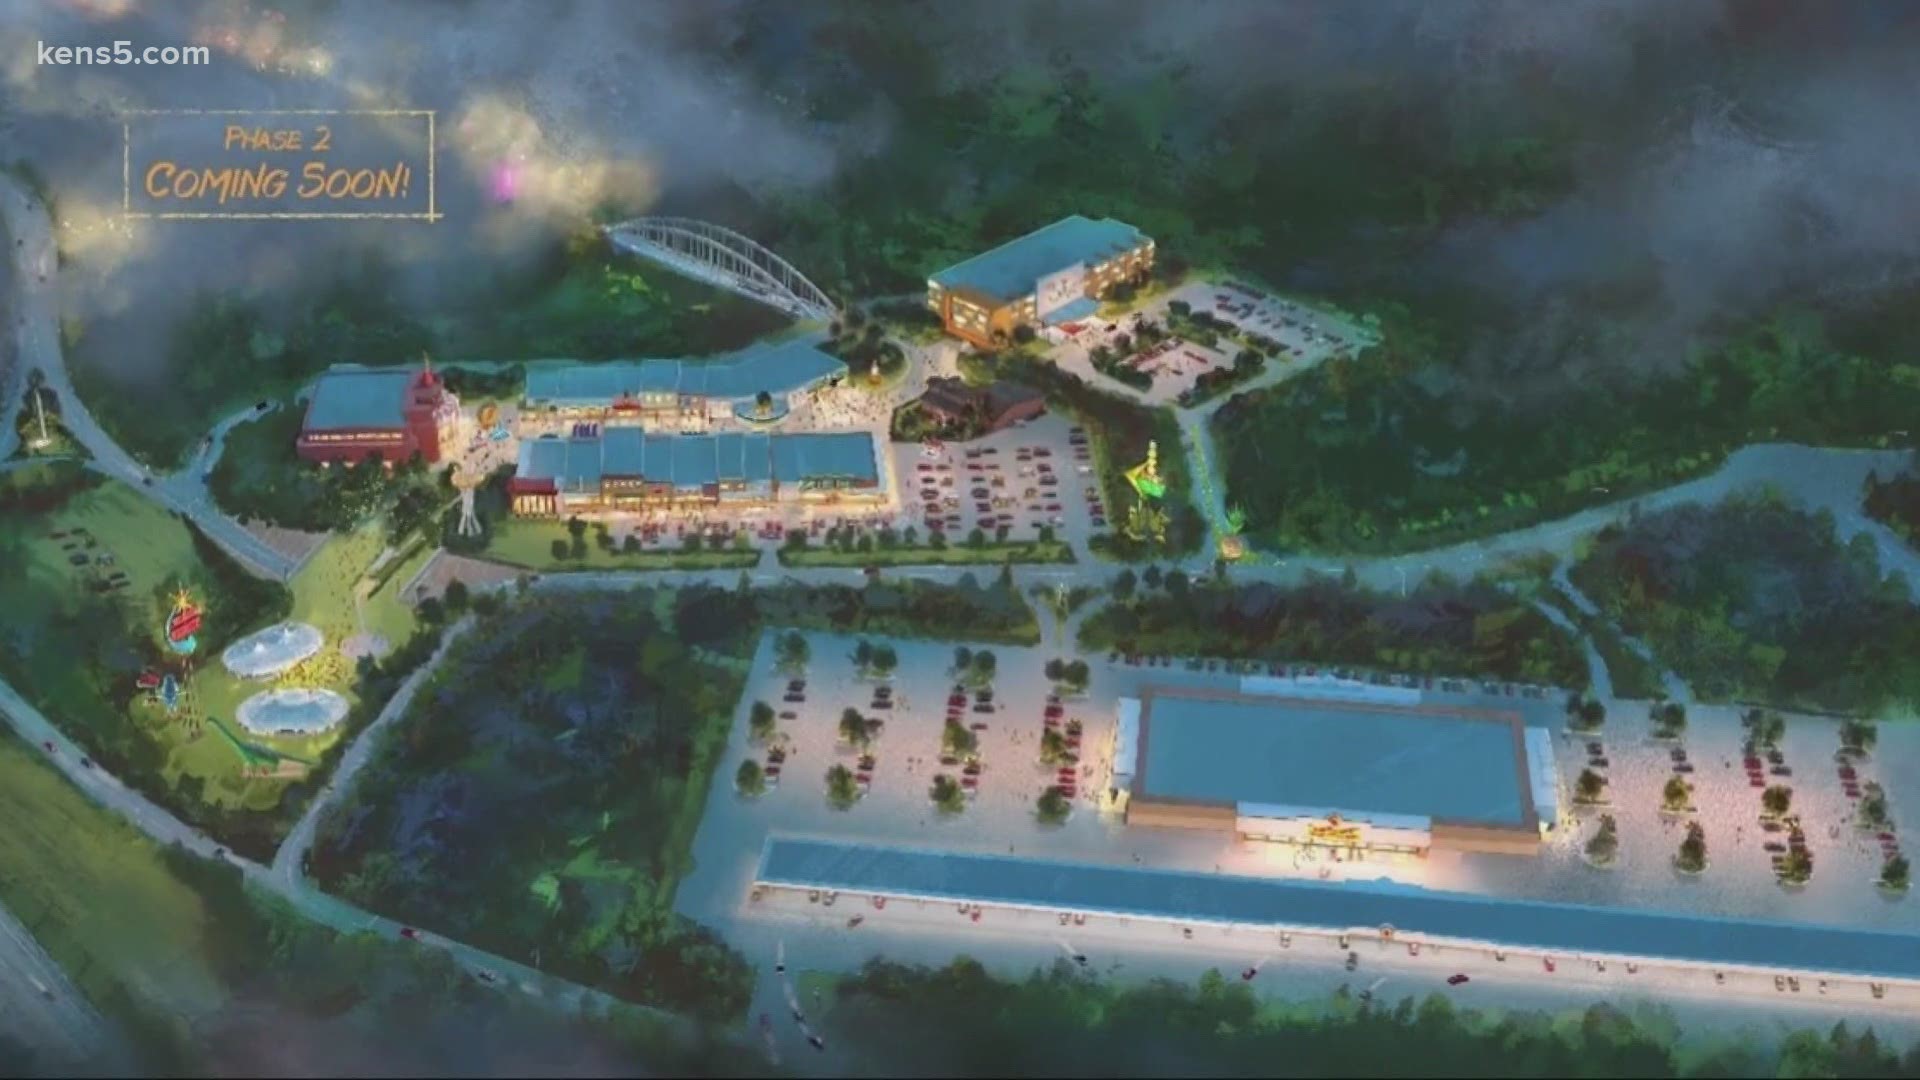 The largest location is currently in New Braunfels, but soon the world's largest travel center will have 120 fuel pumps on 2,200 acres in Tennessee near the Smokies.